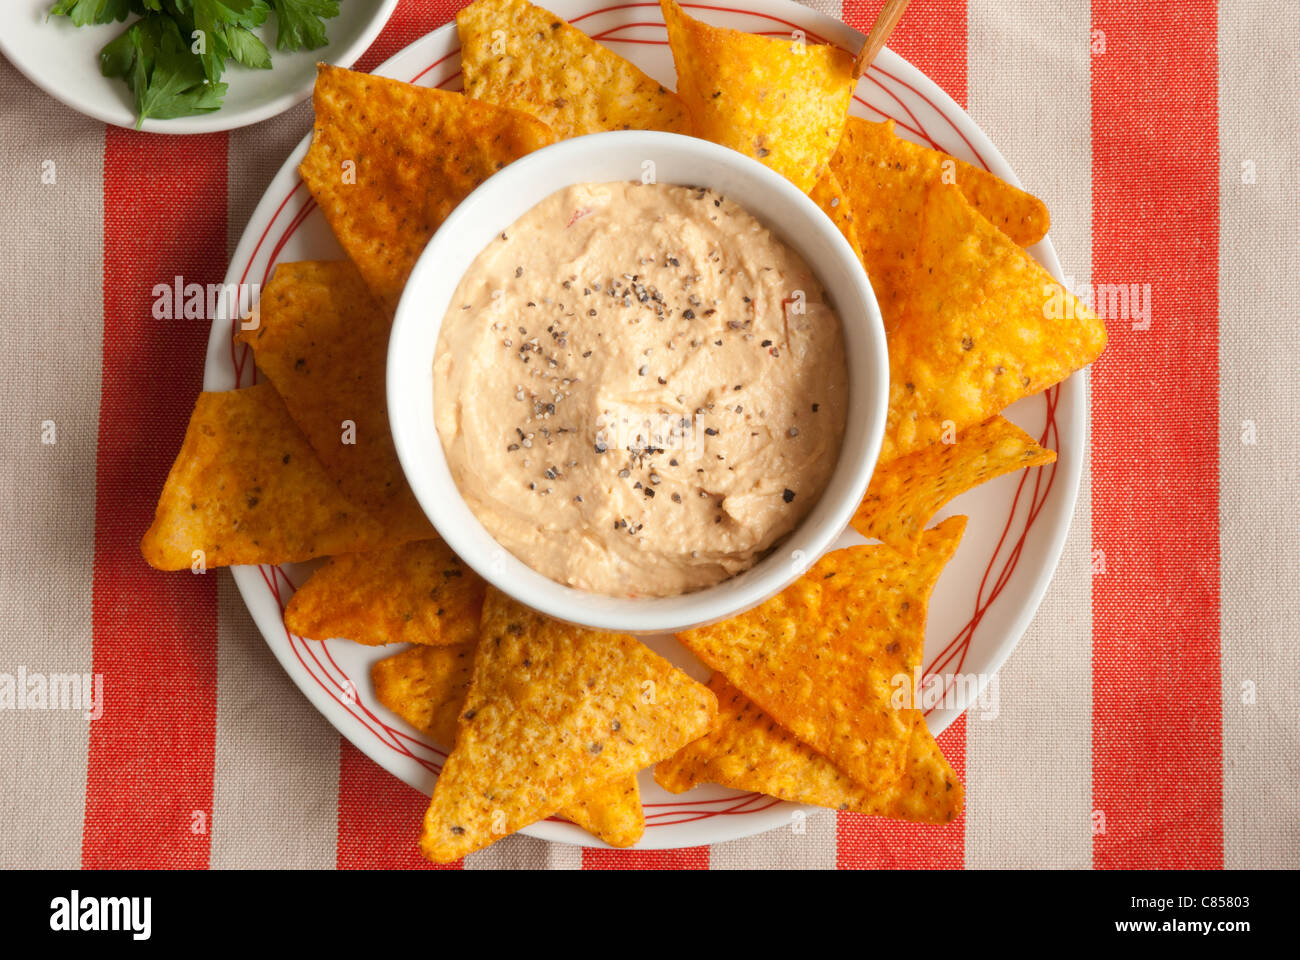 Tortilla crisps with red pepper houmous Stock Photo